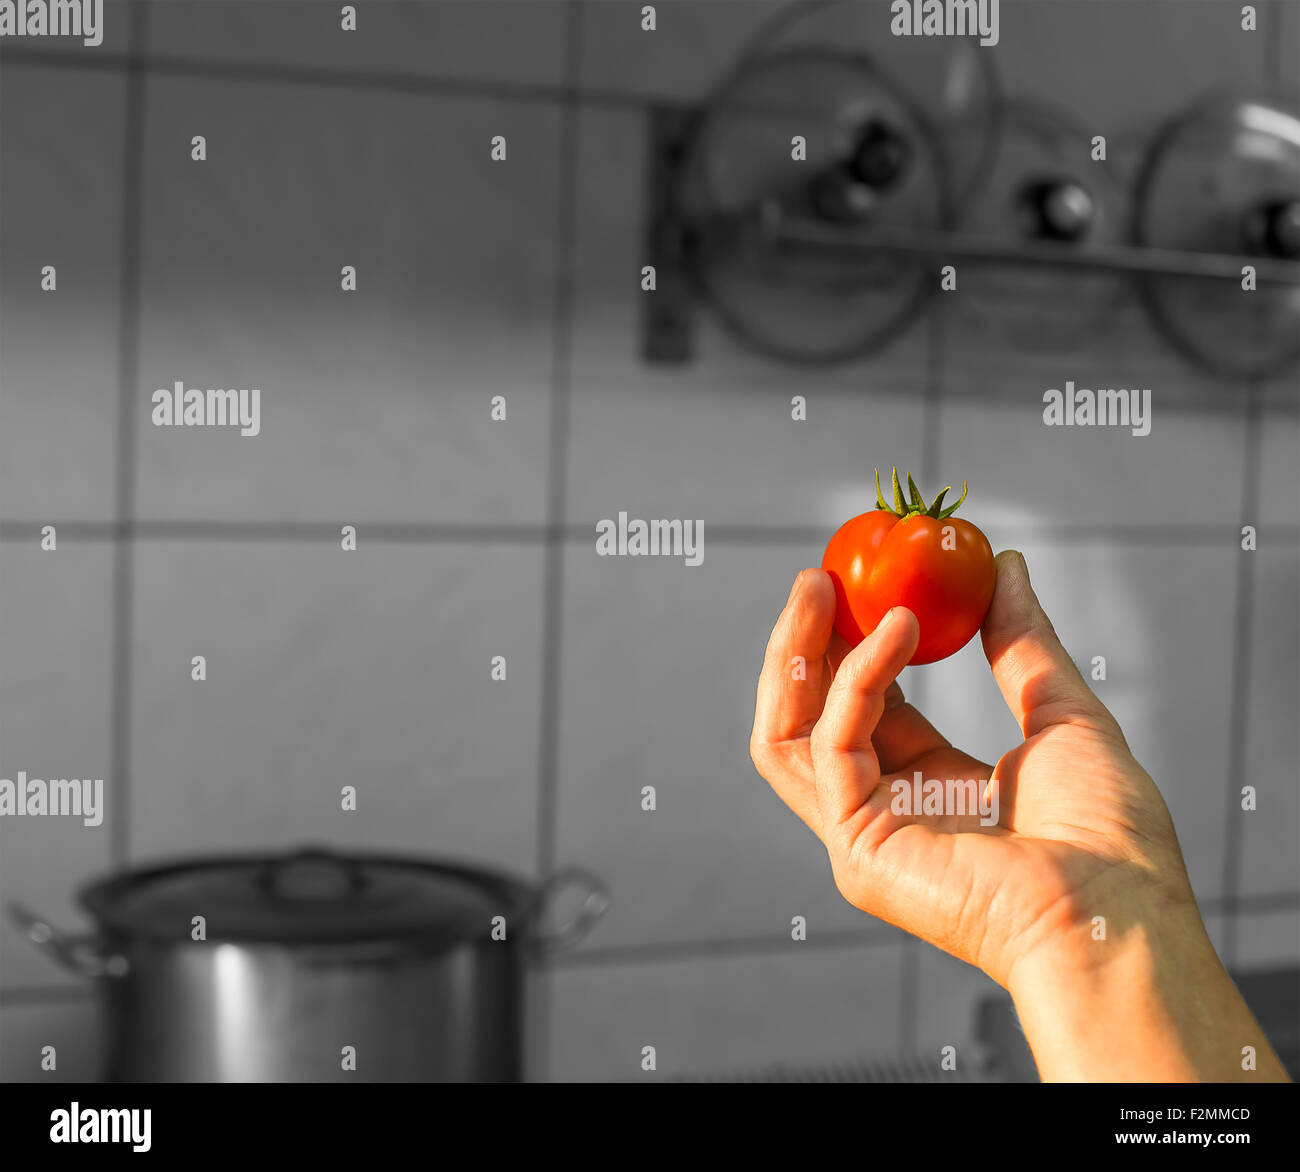 Fresh picked tomato in persons hand. Stock Photo